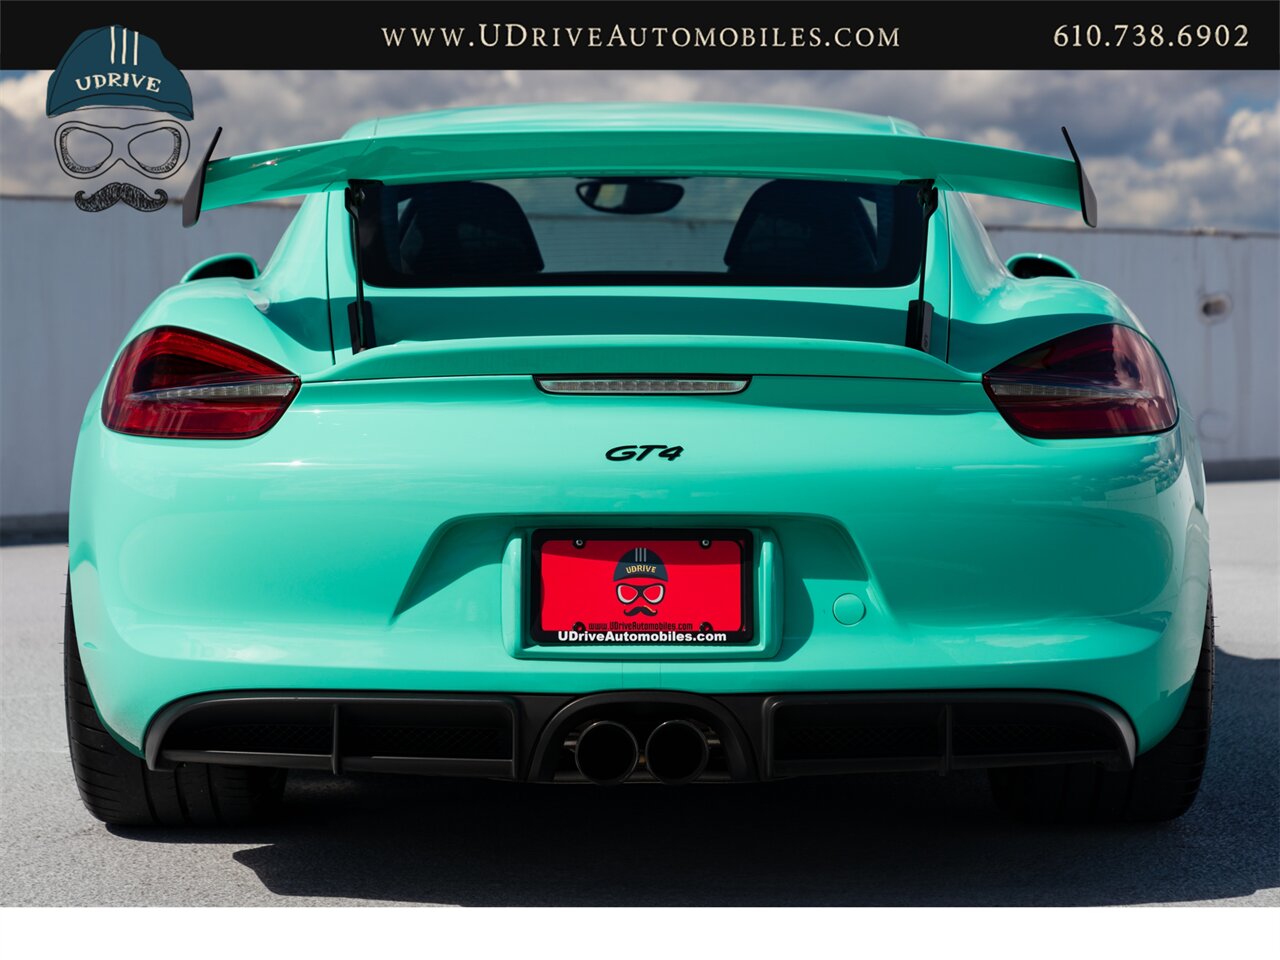 2016 Porsche Cayman GT4  PTS Mint Green 1 of 2 PCCB Bucket Seats PPF - Photo 22 - West Chester, PA 19382